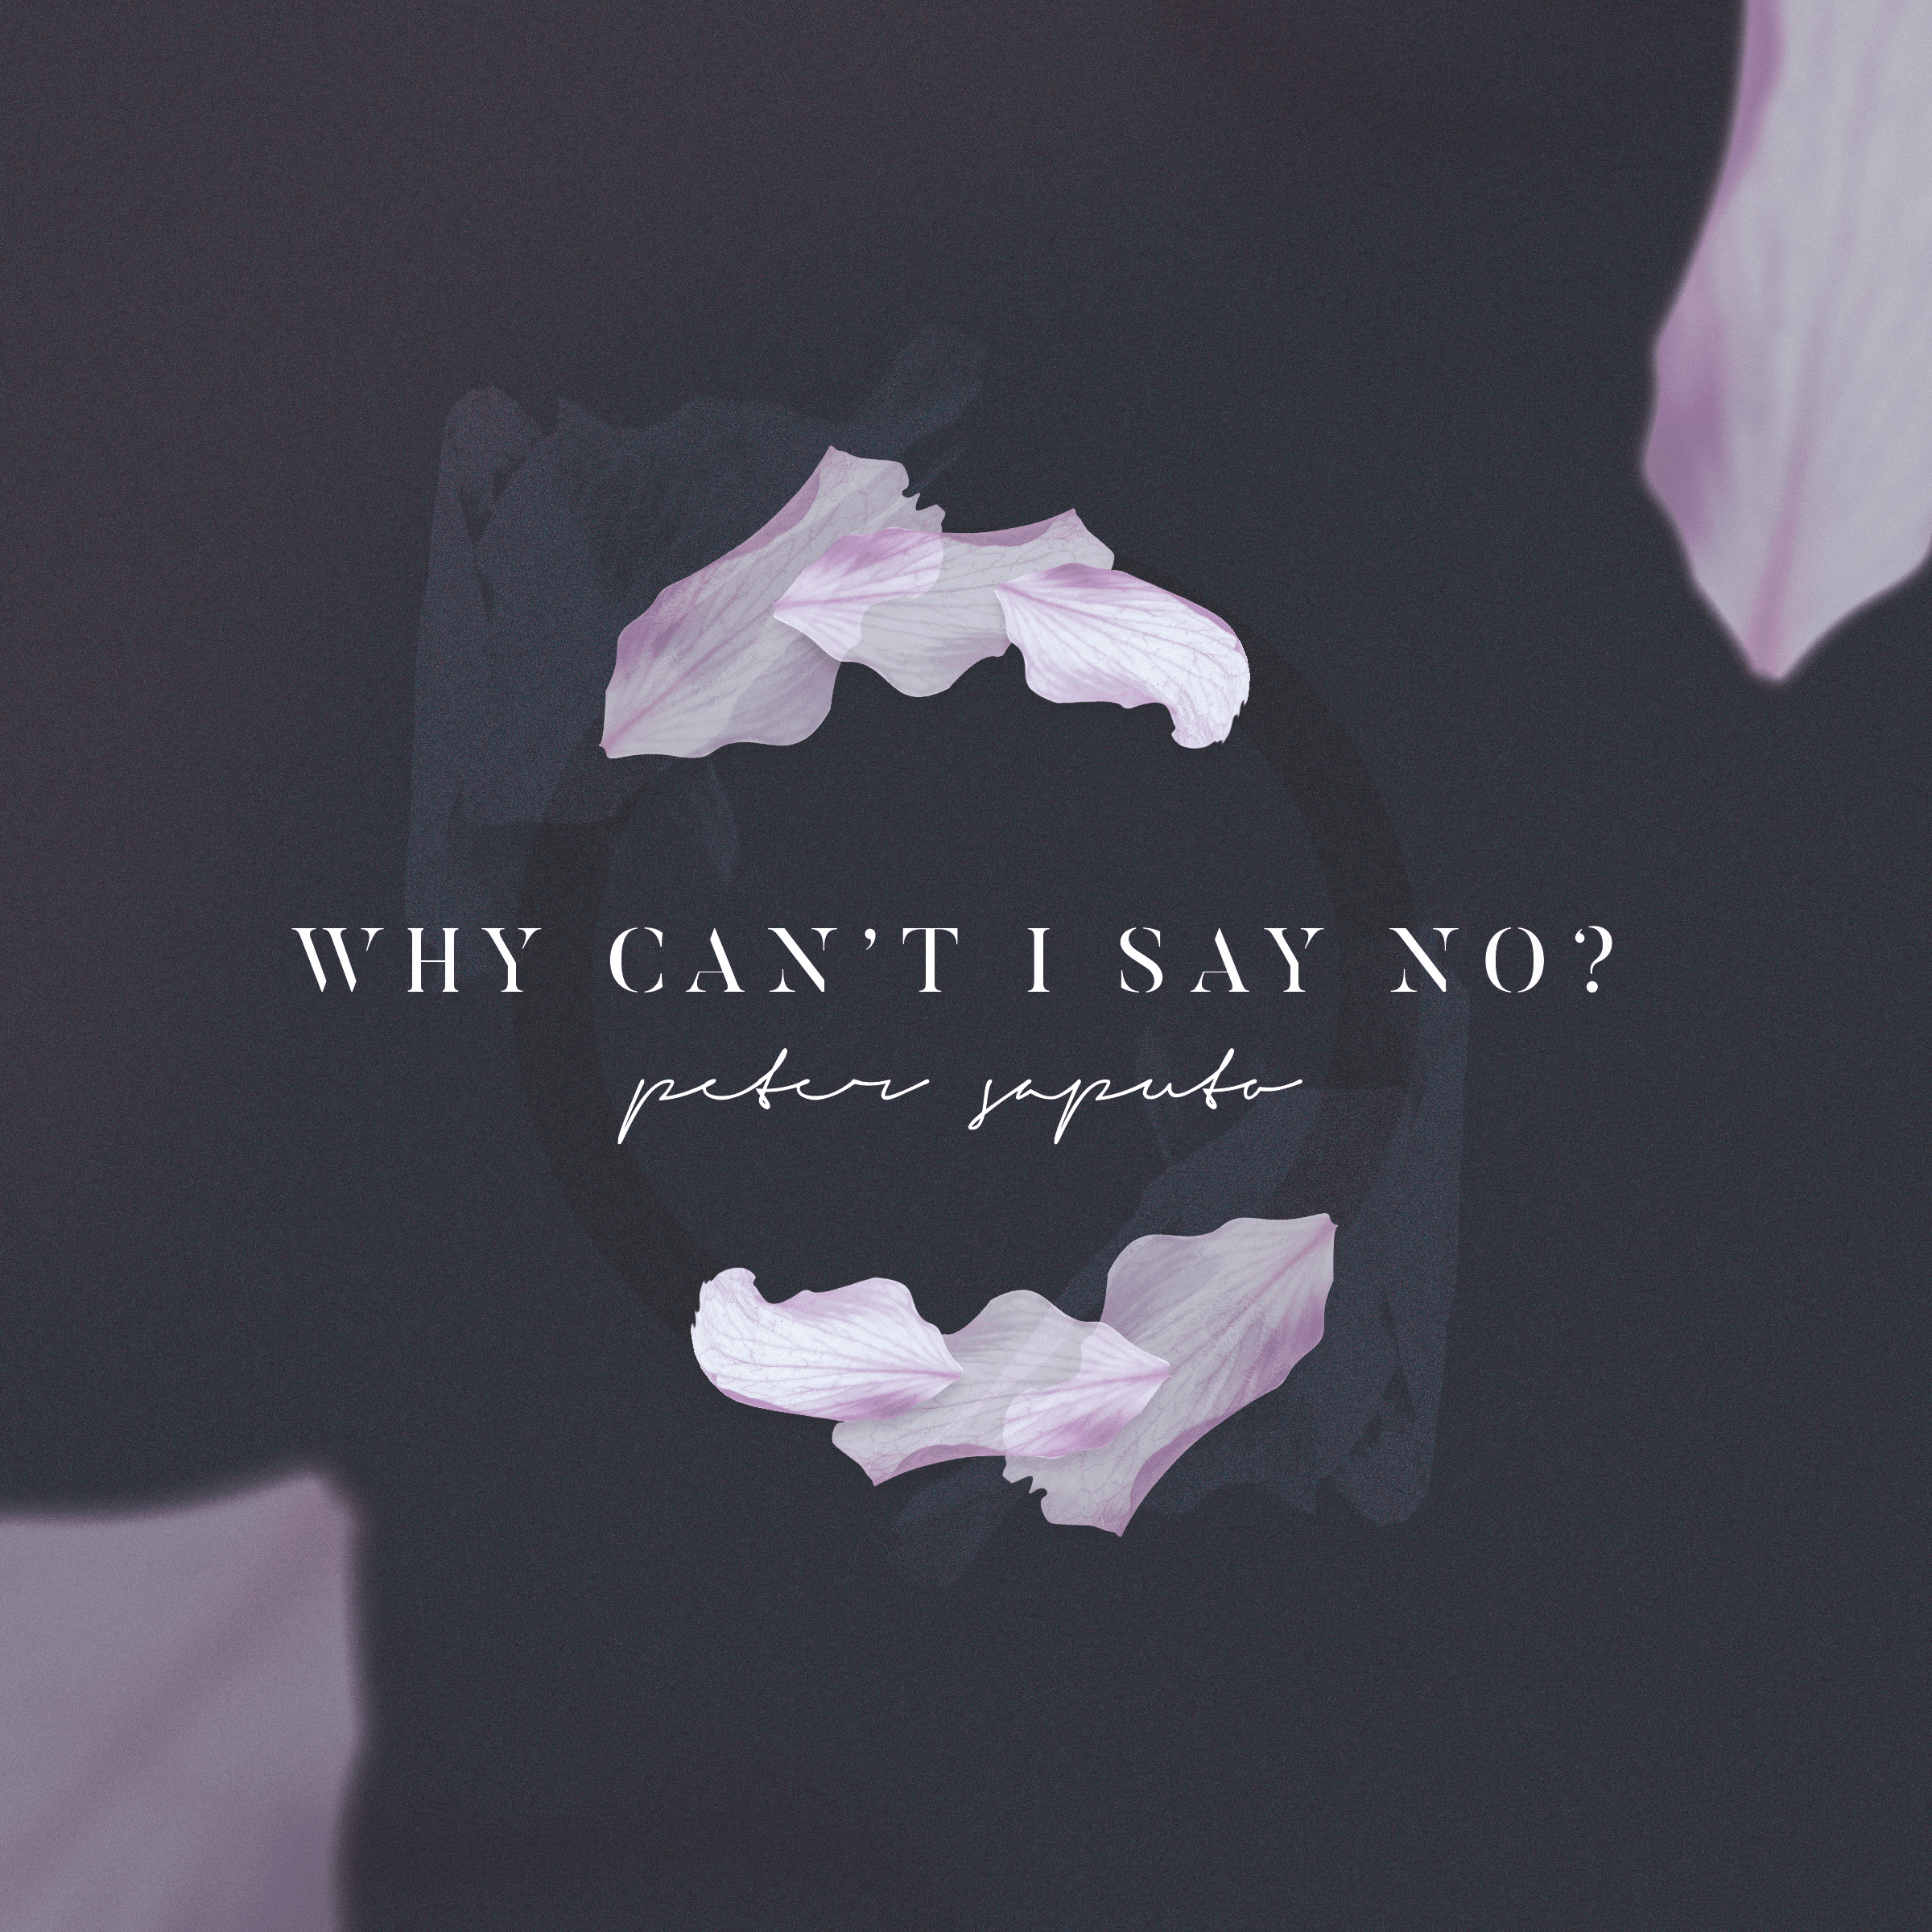 Cover art for Peter Saputo's song: Why Can't I Say No?